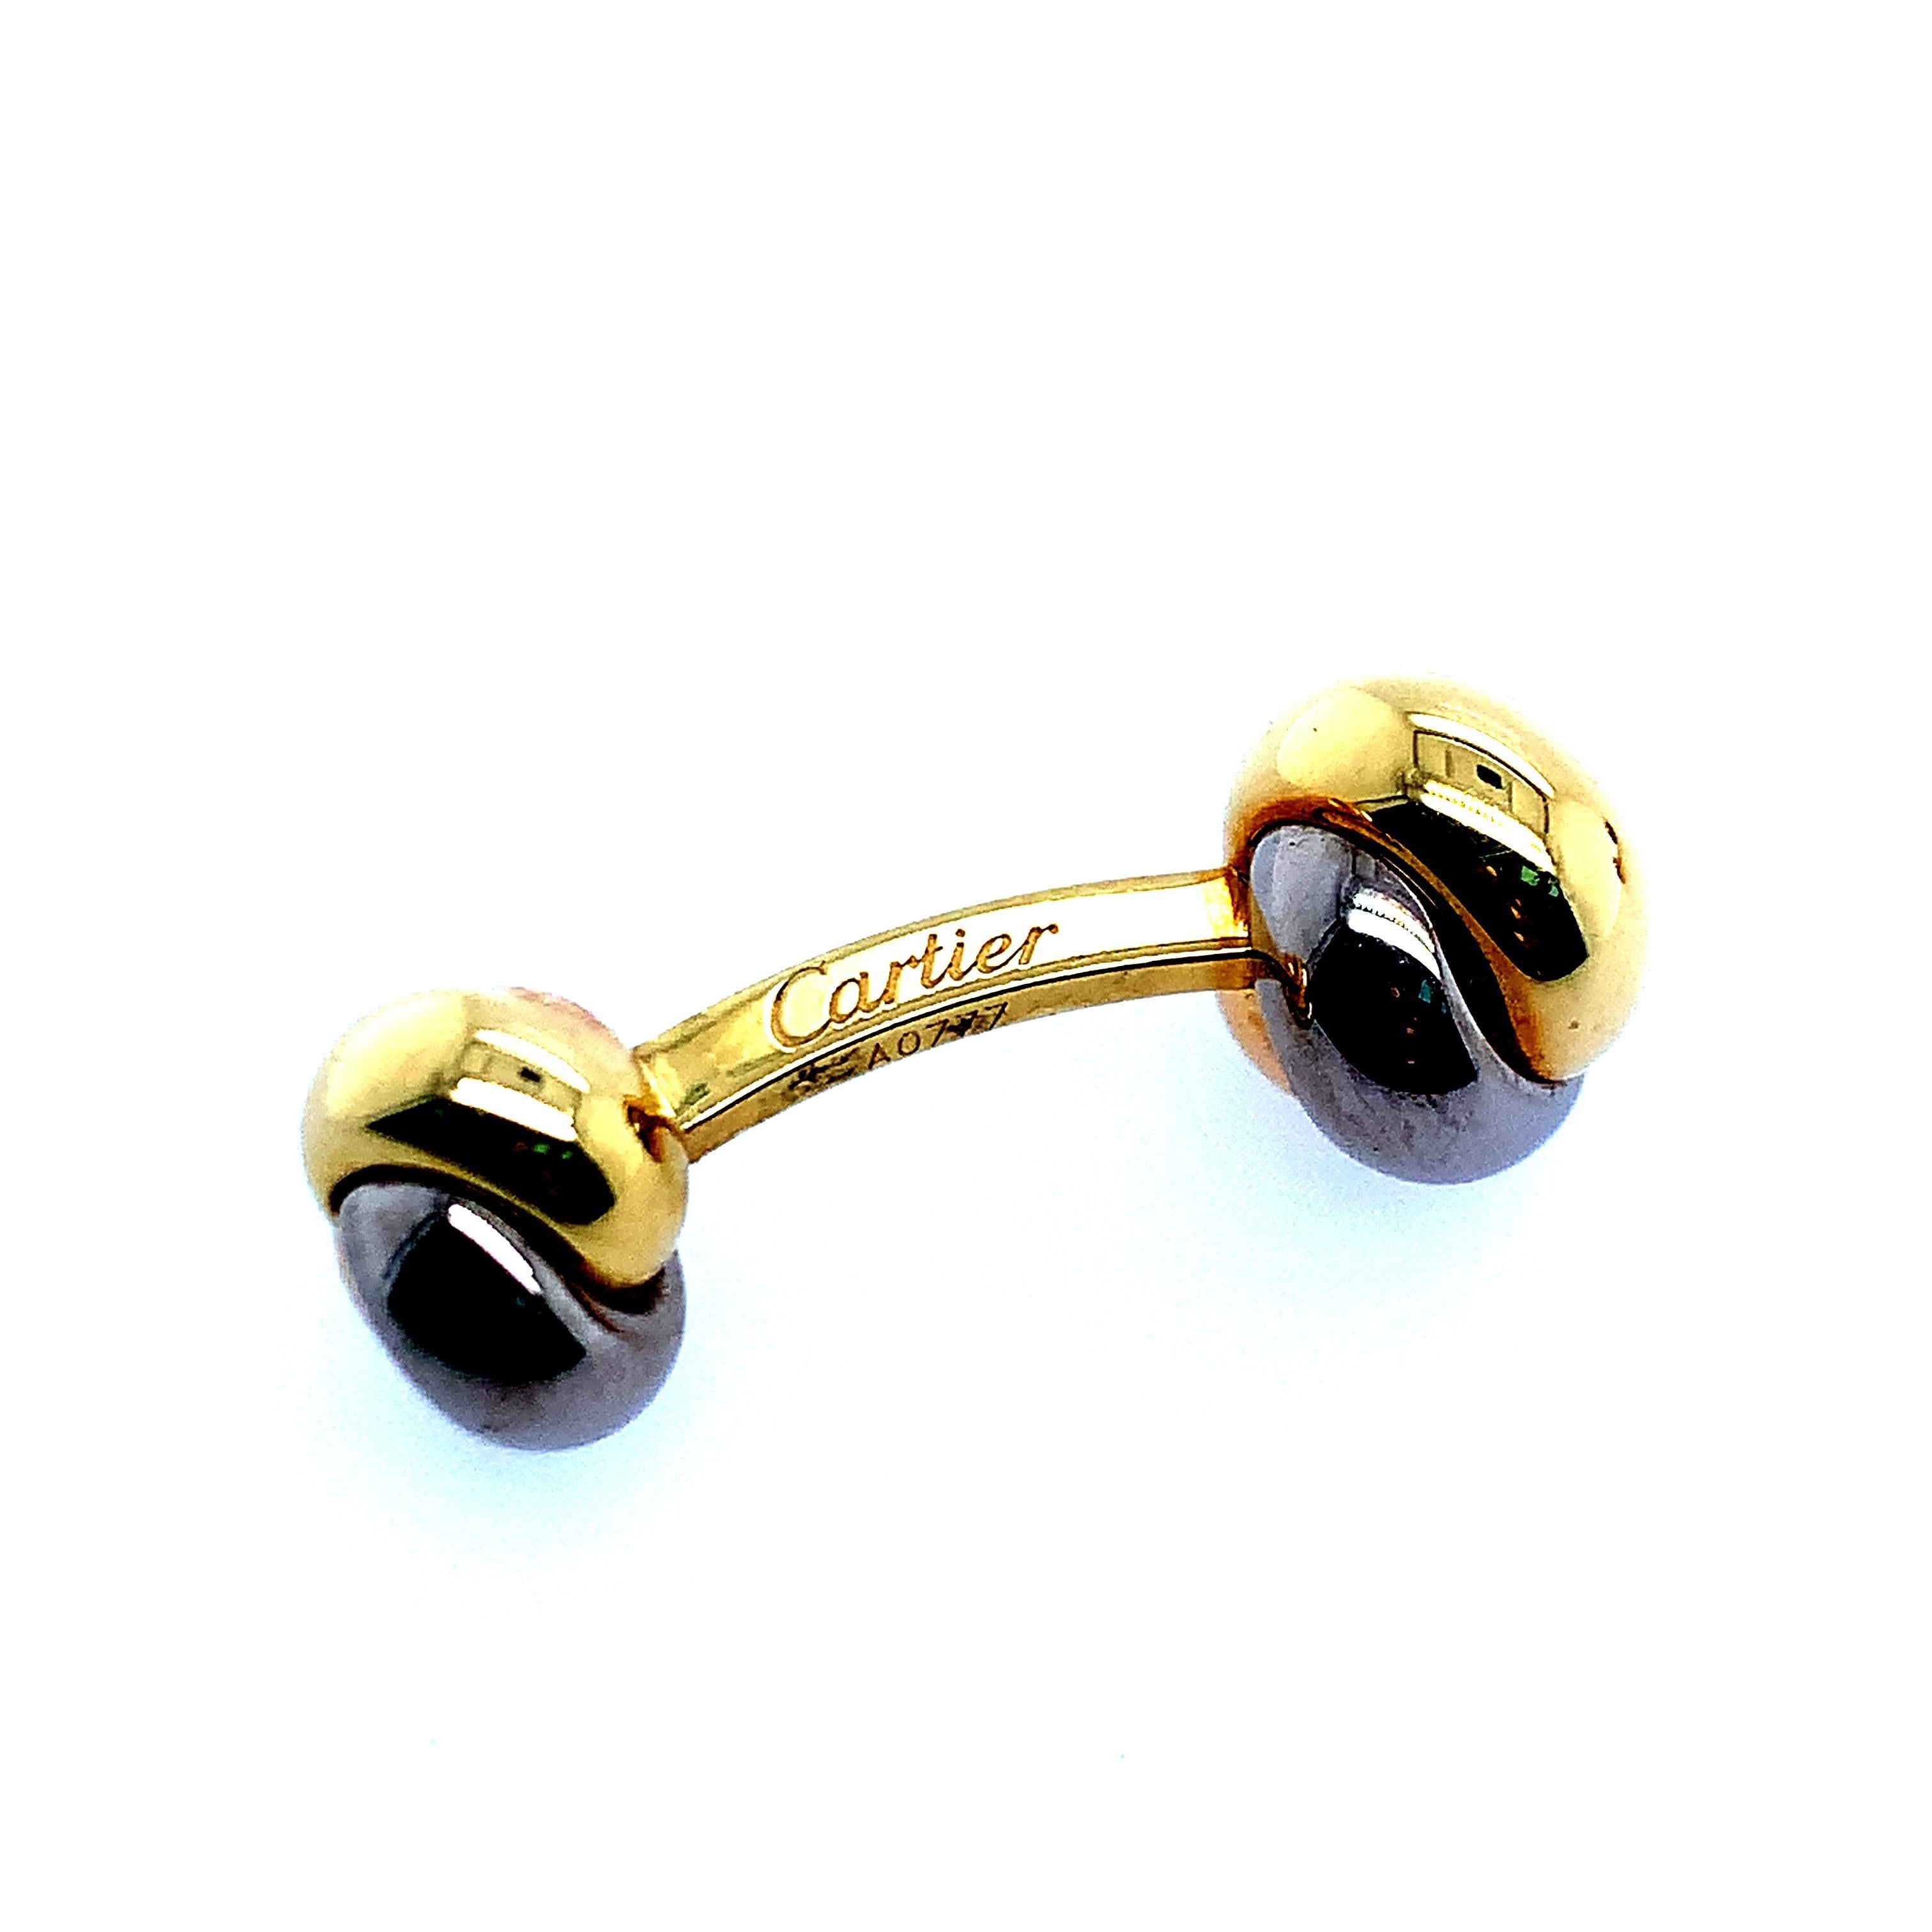 Cartier Tri-Color Gold Cufflinks In Excellent Condition For Sale In New York, NY